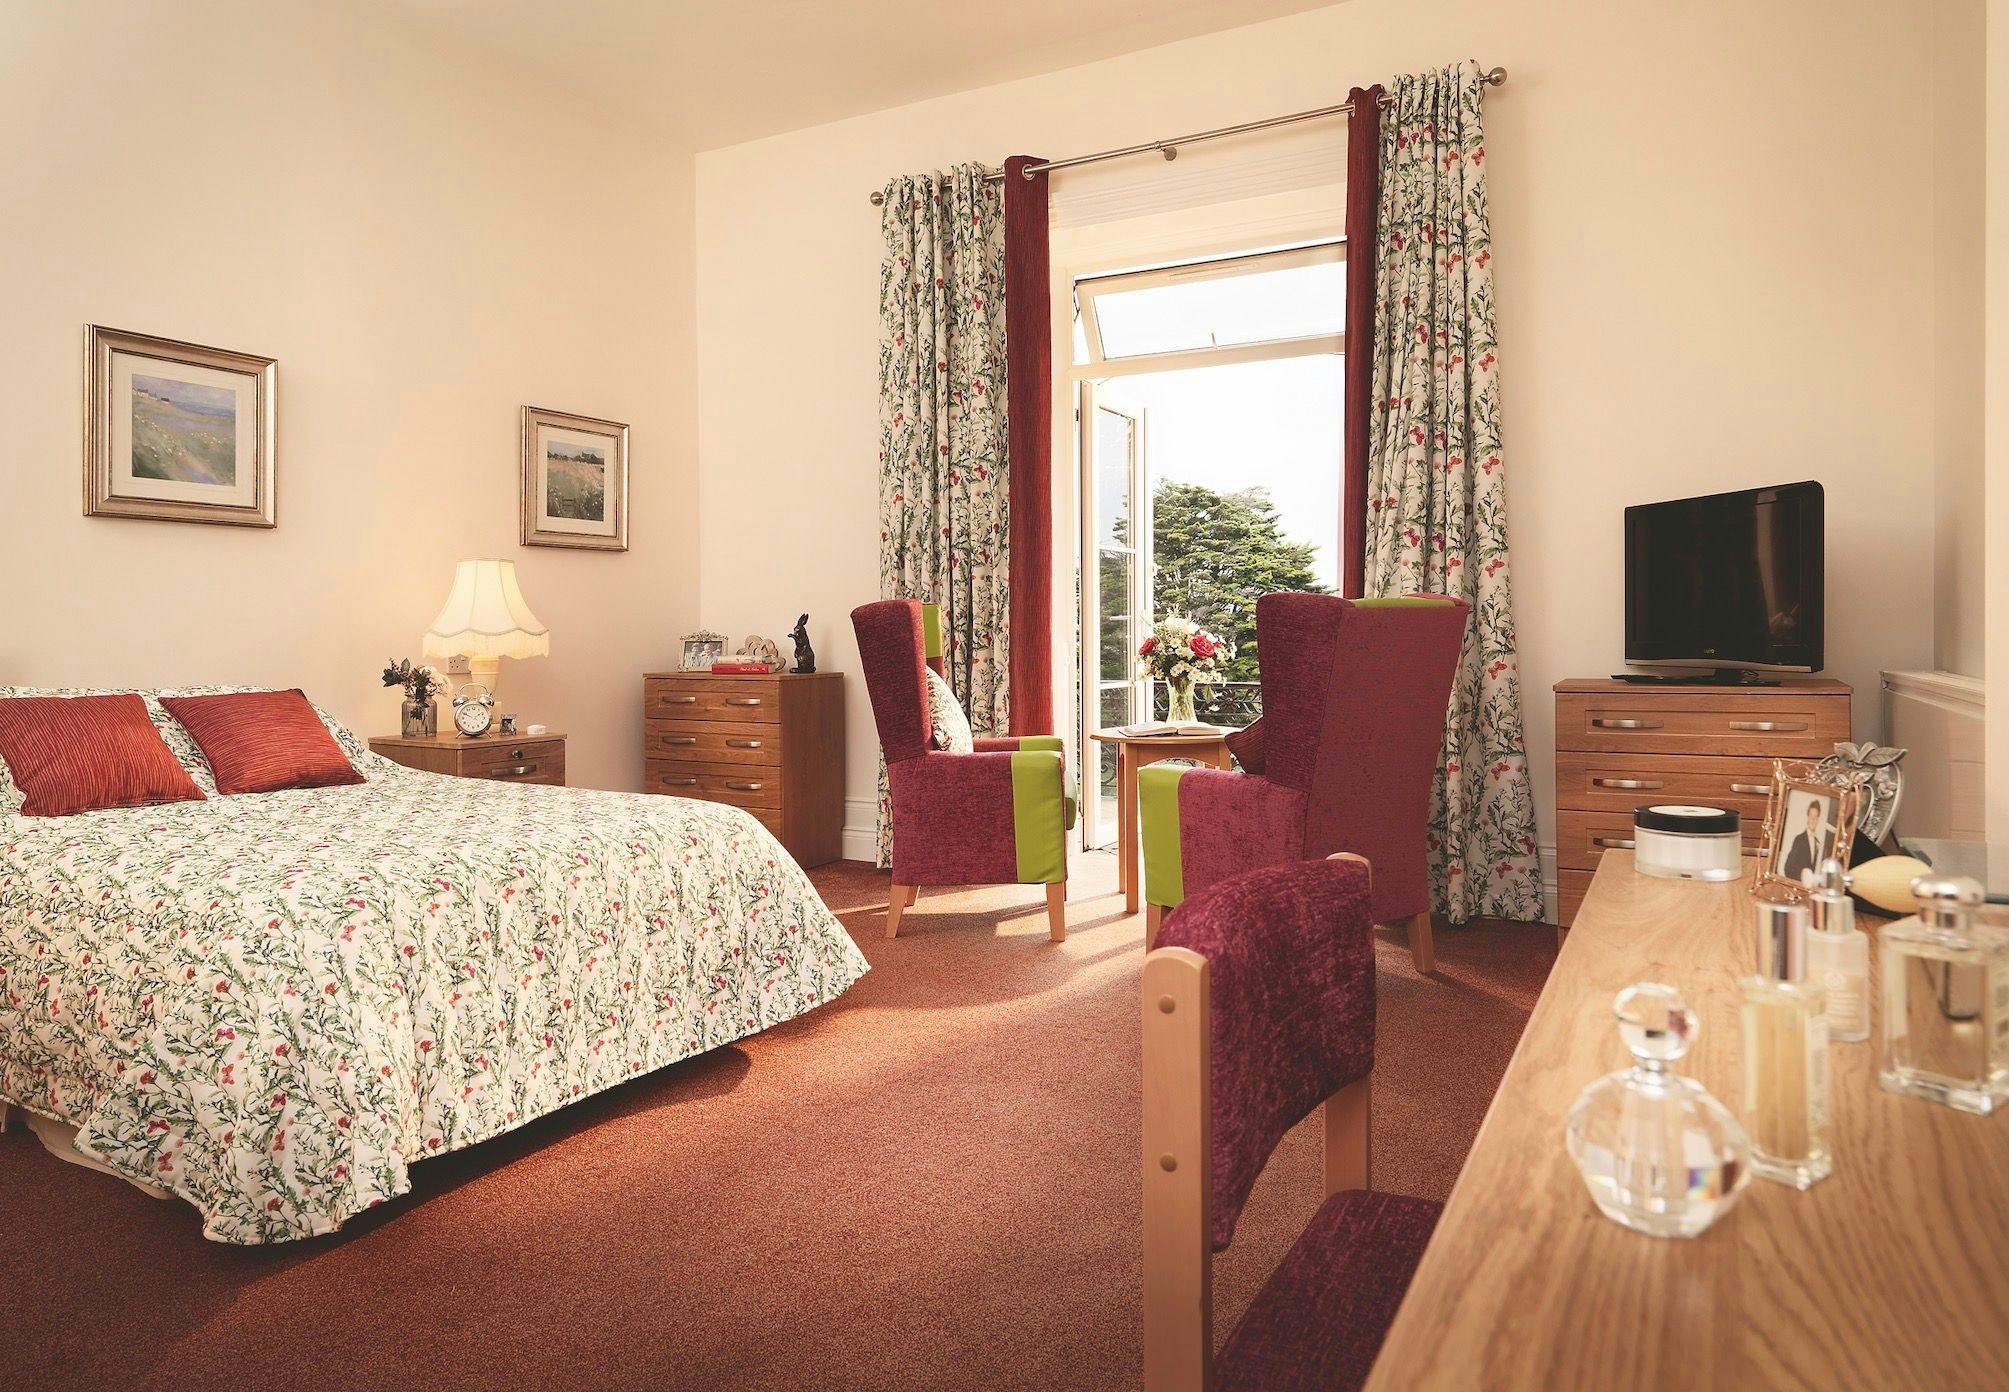 Bedroom at West Cliff Hall Care Home in Hythe, Kent